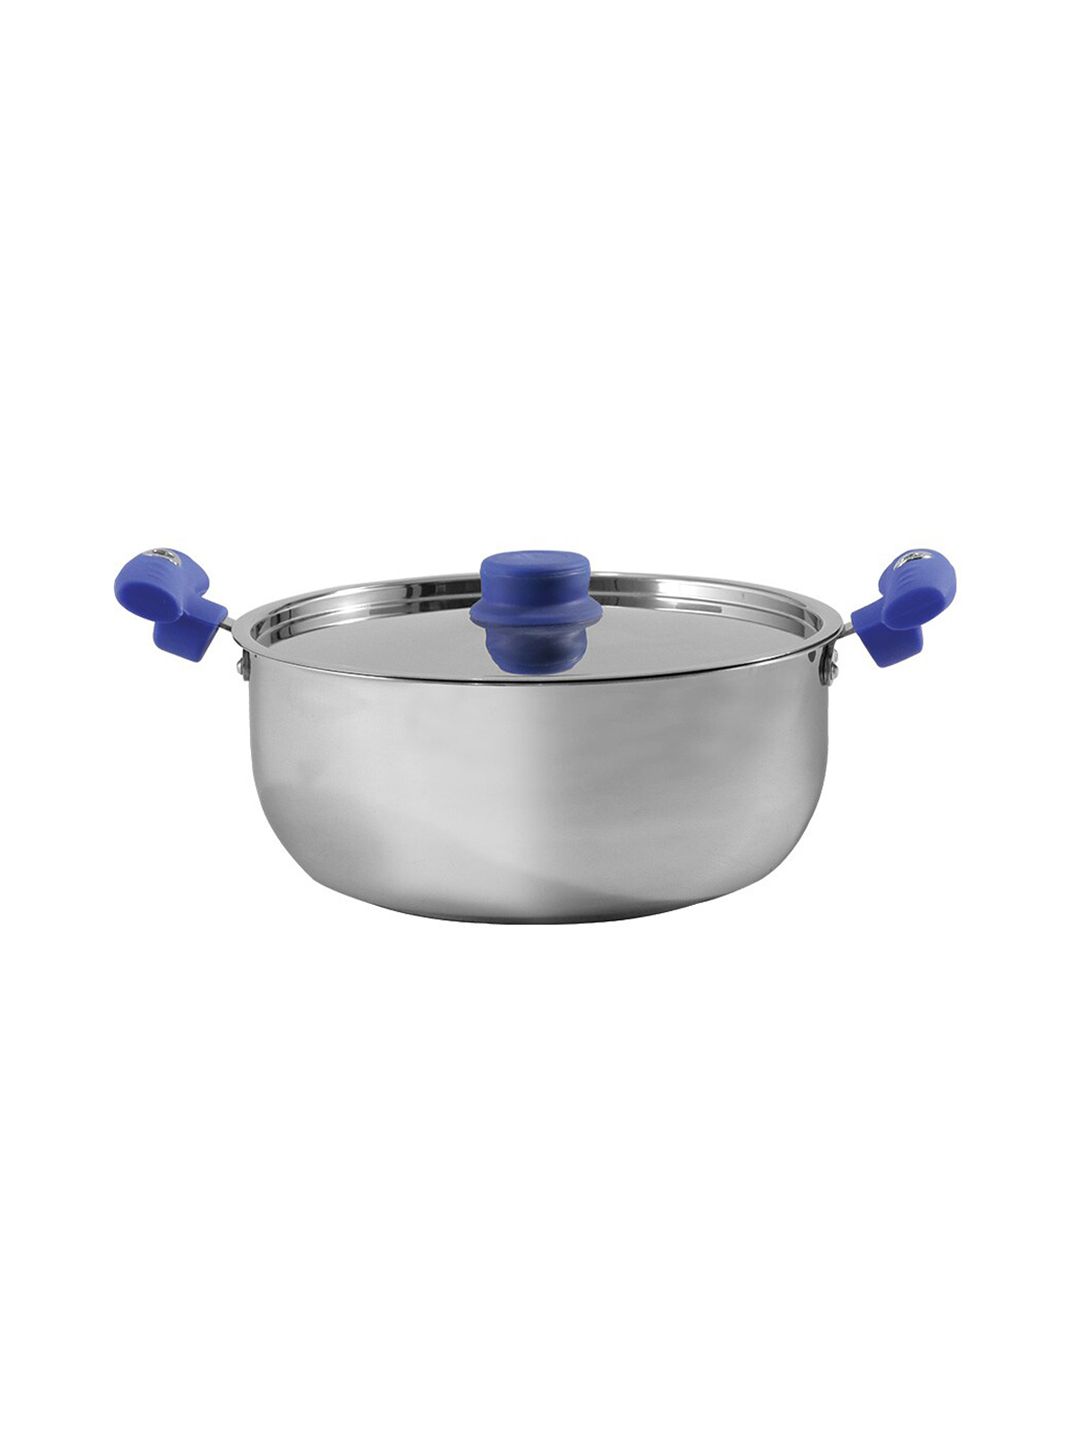 Wonderchef  Silver-Toned Solid Stainless-Steel Biriyani Pot Price in India